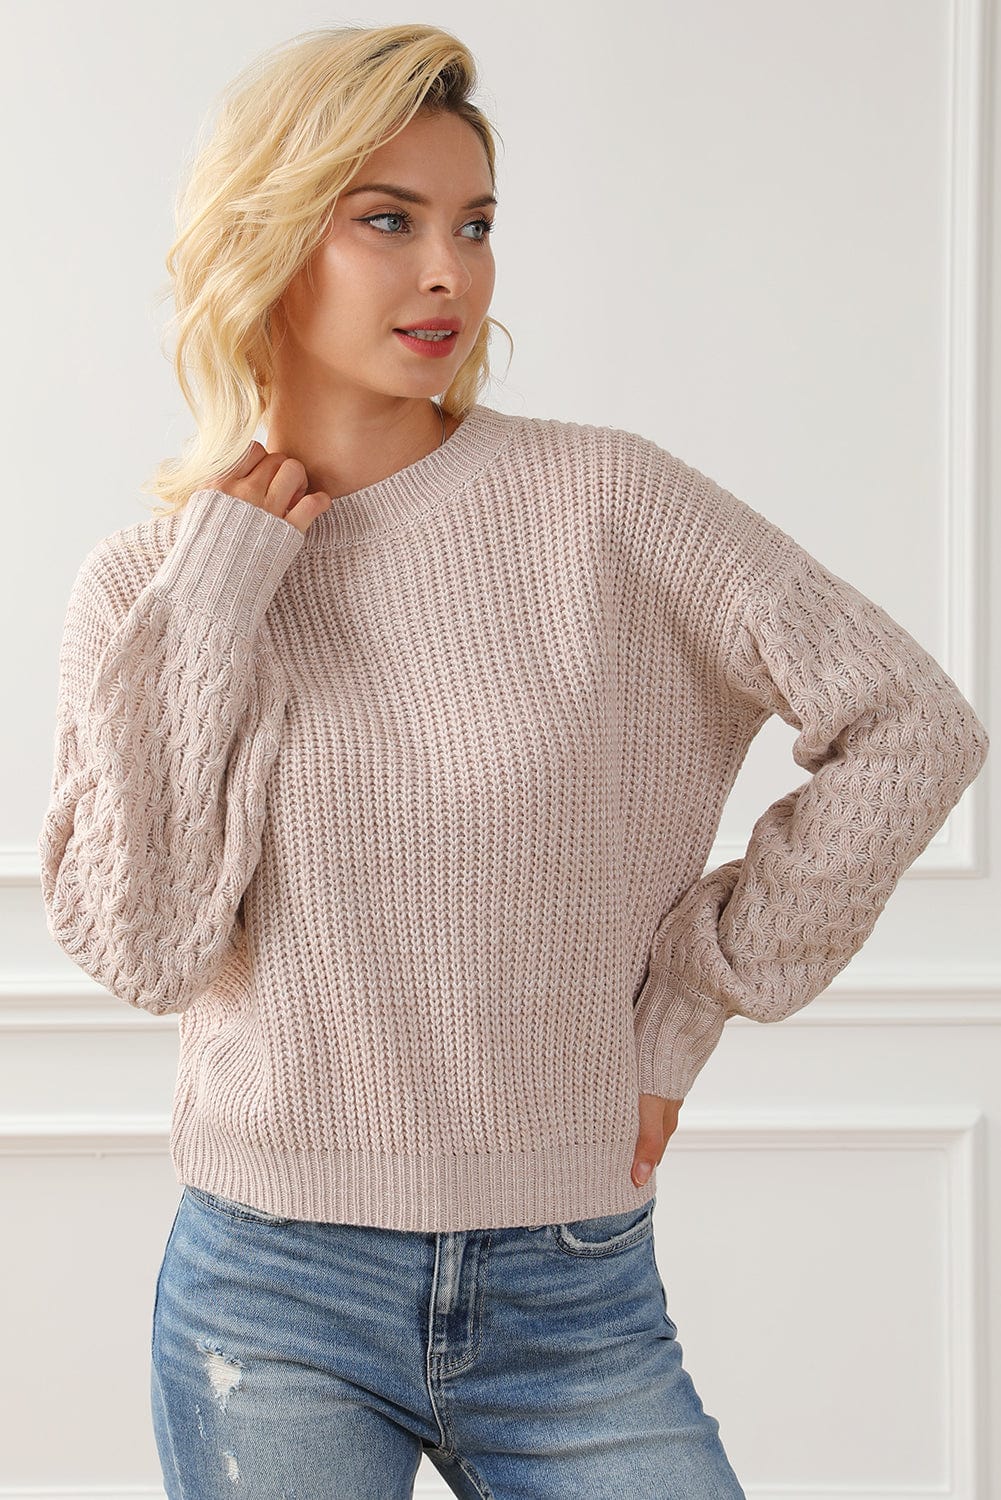 The802Gypsy  Tops Traveling Gypsy Sally Cable Knit Sleeve Drop Shoulder Sweater